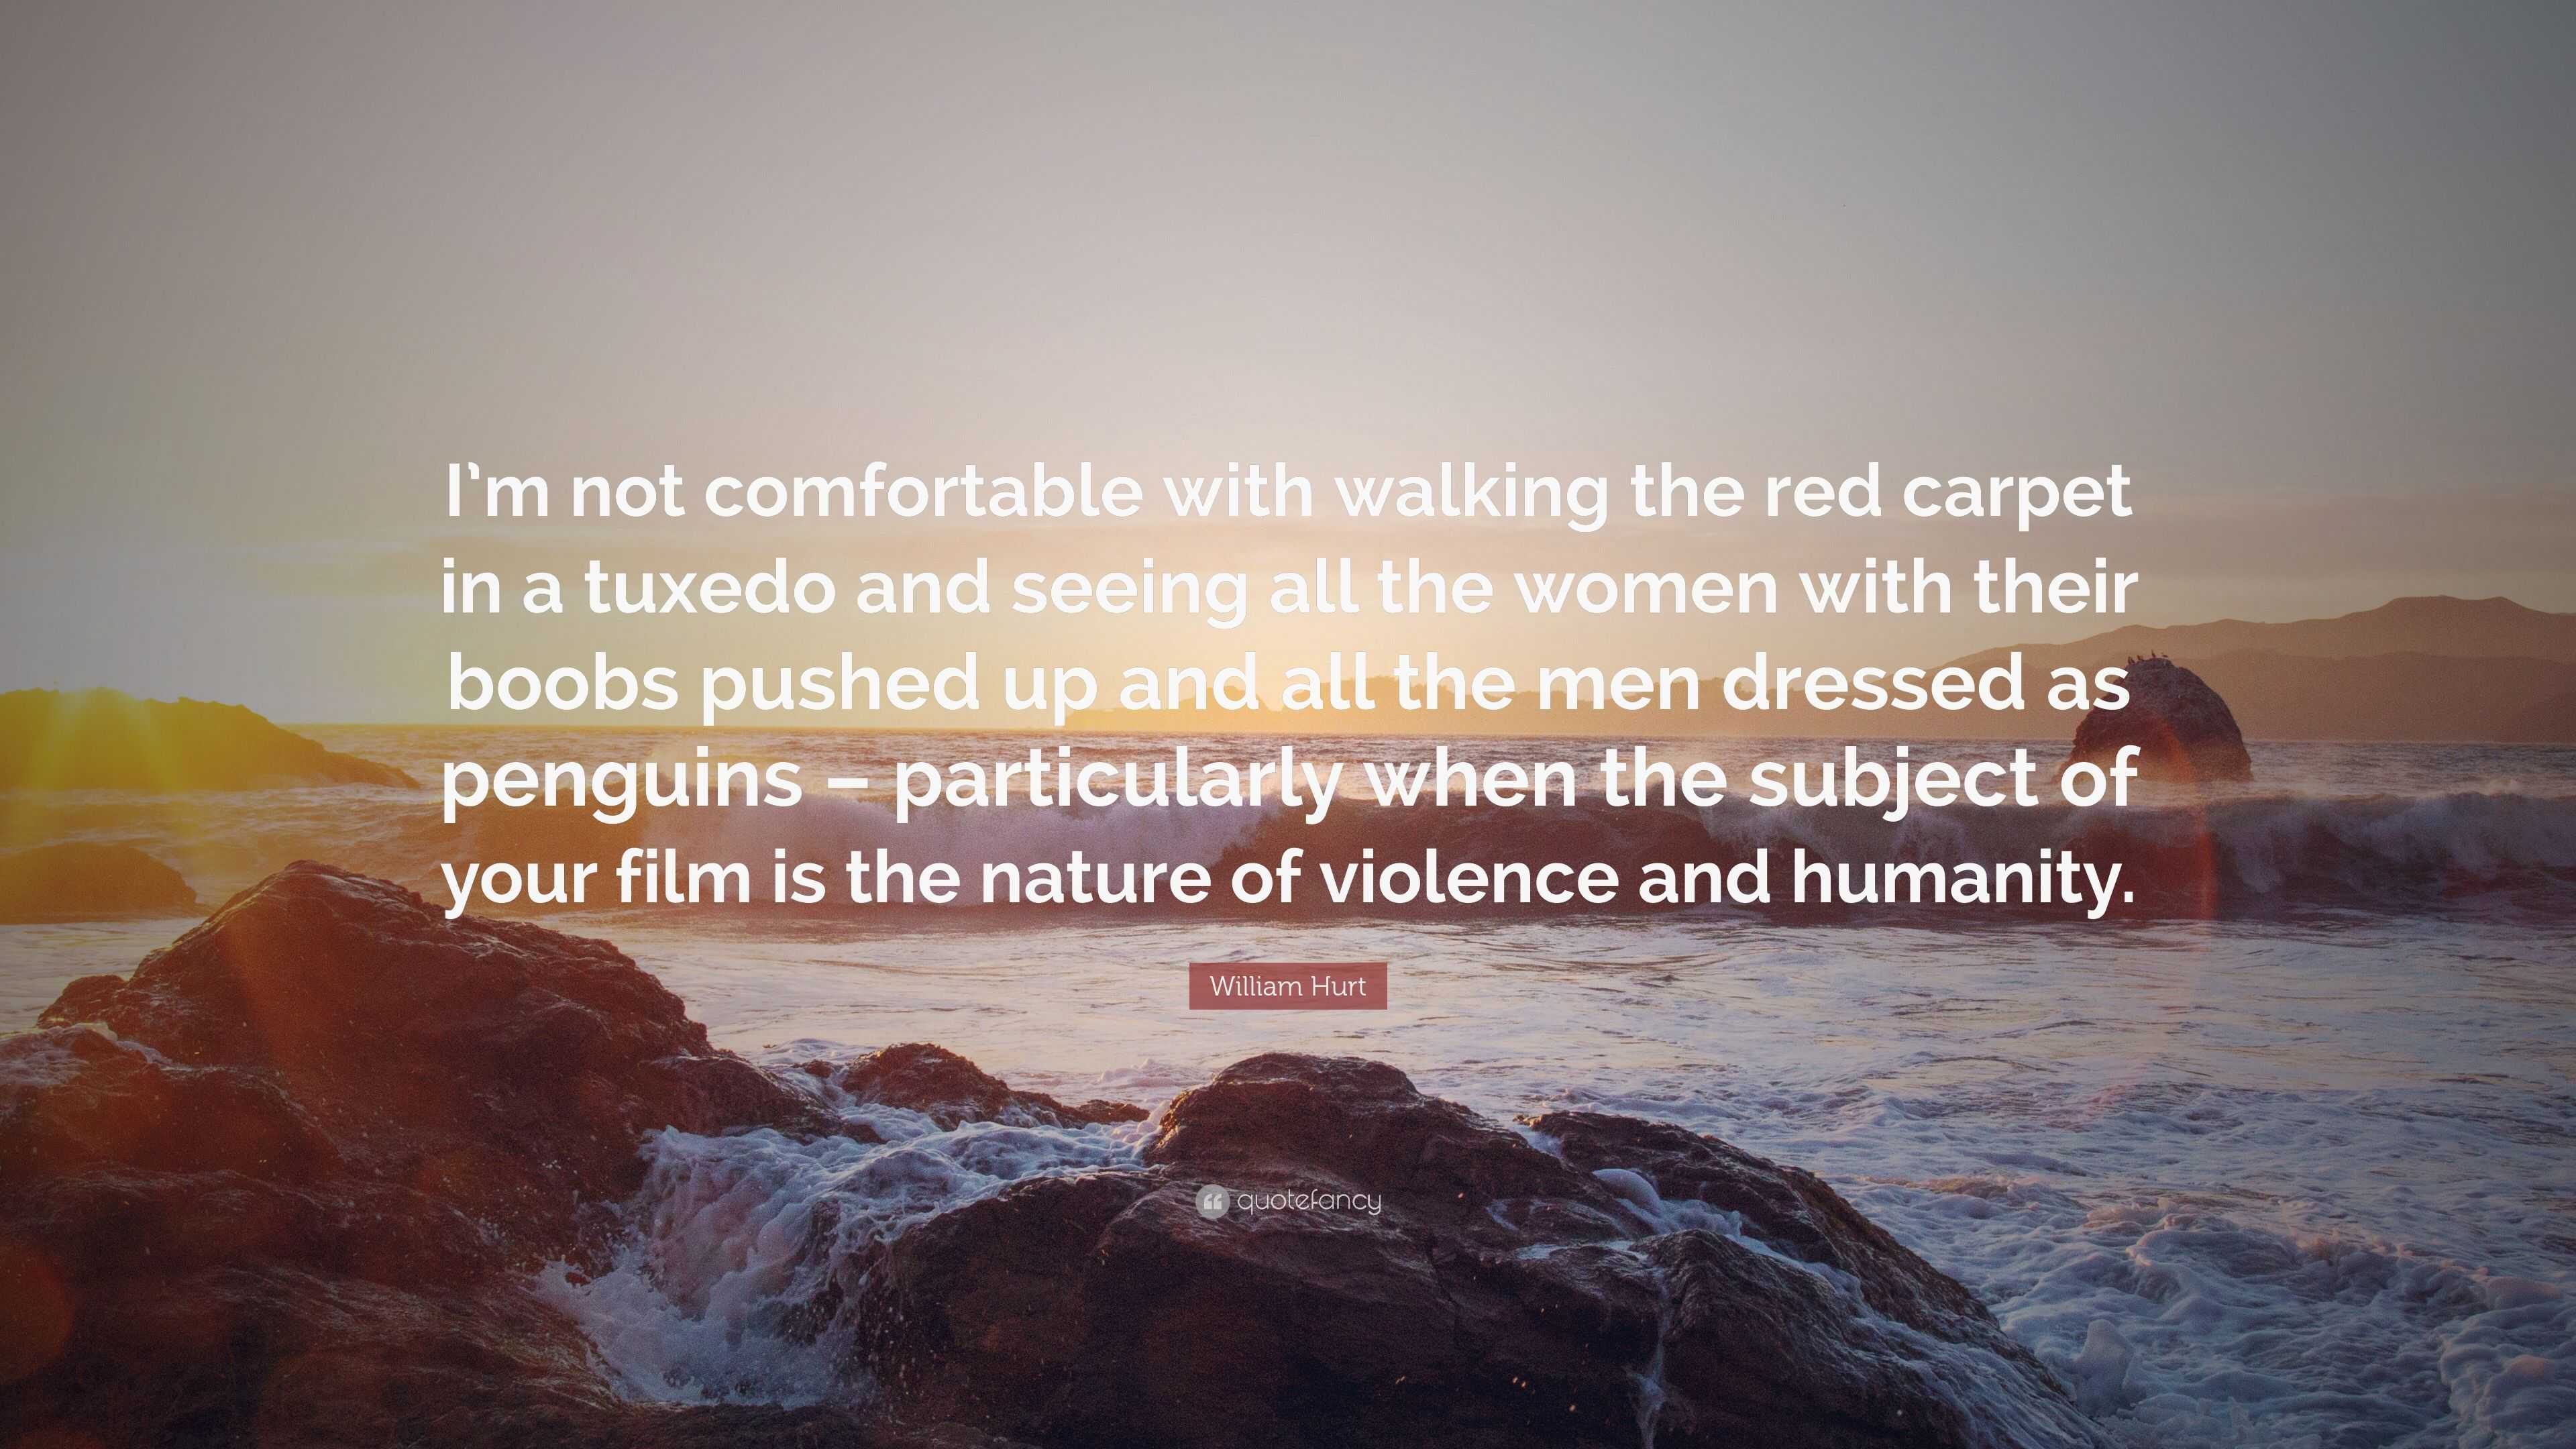 https://quotefancy.com/media/wallpaper/3840x2160/5491772-William-Hurt-Quote-I-m-not-comfortable-with-walking-the-red-carpet.jpg